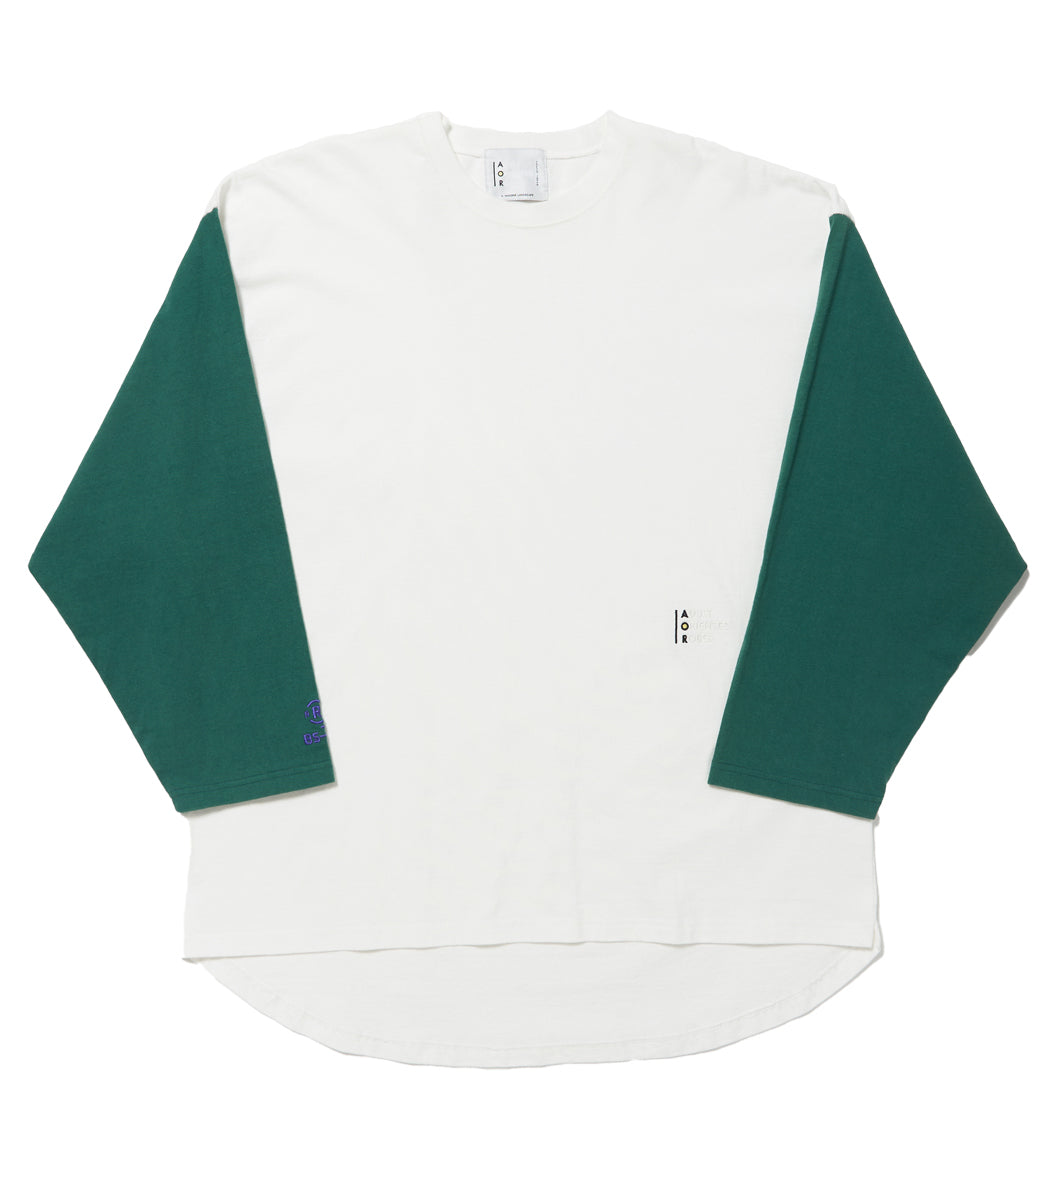 Load image into Gallery viewer, Baseball T-Shirt OFF WHITE×GREEN
